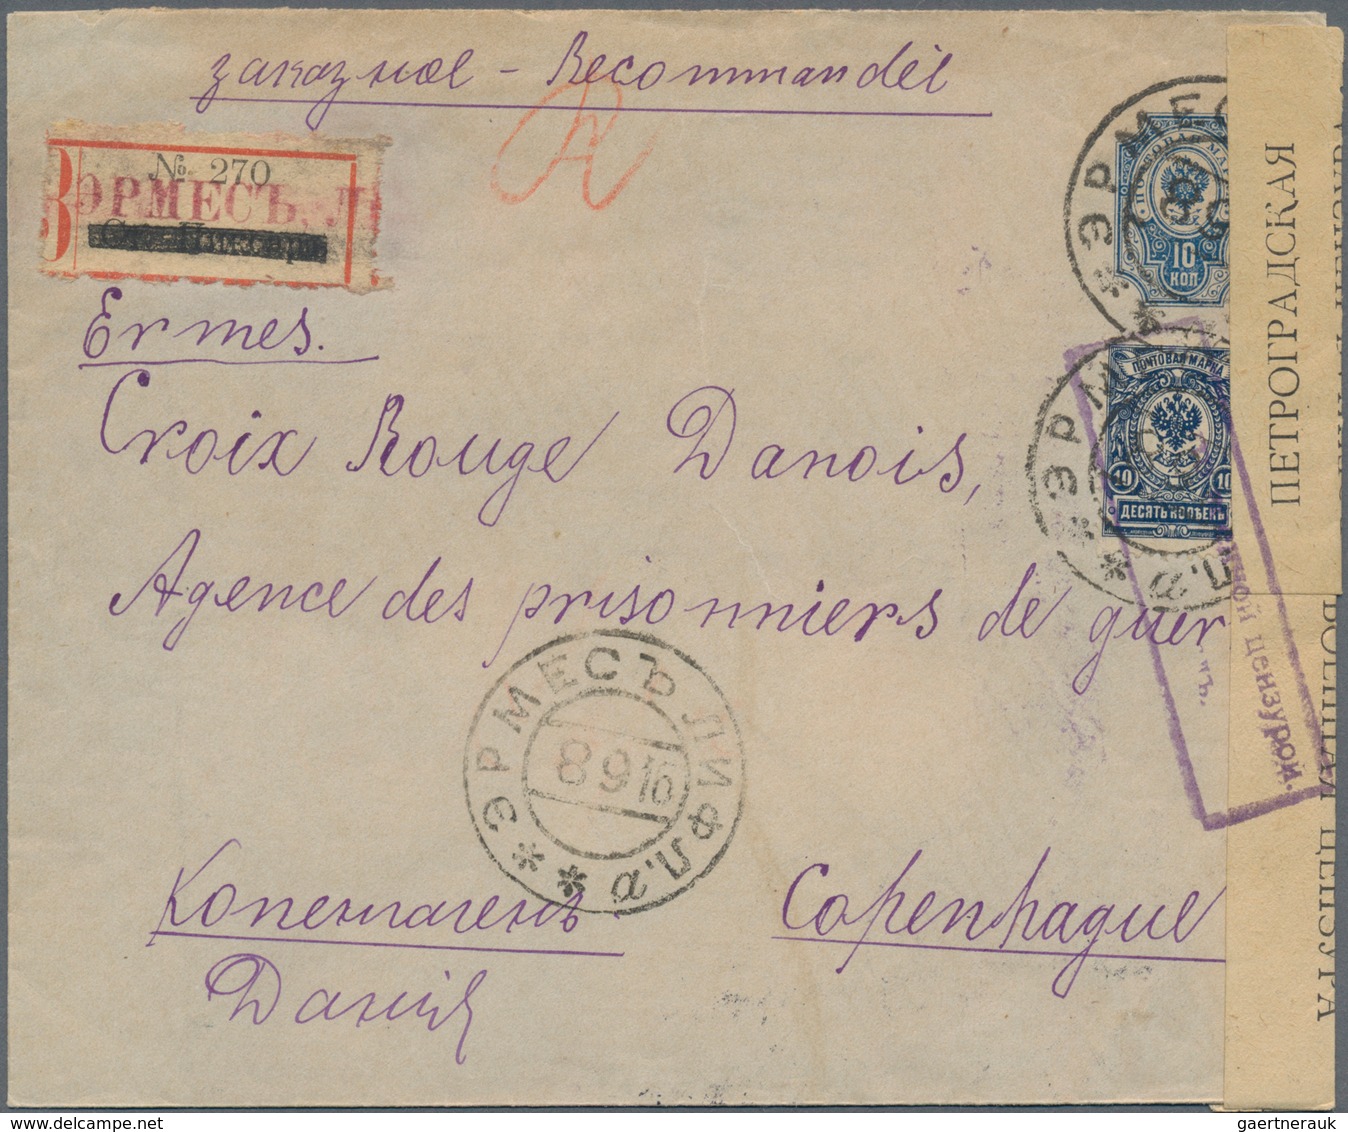 Russland: 1860/1917 fantastic collection of the postal history of the Baltic States of the Tsarist p